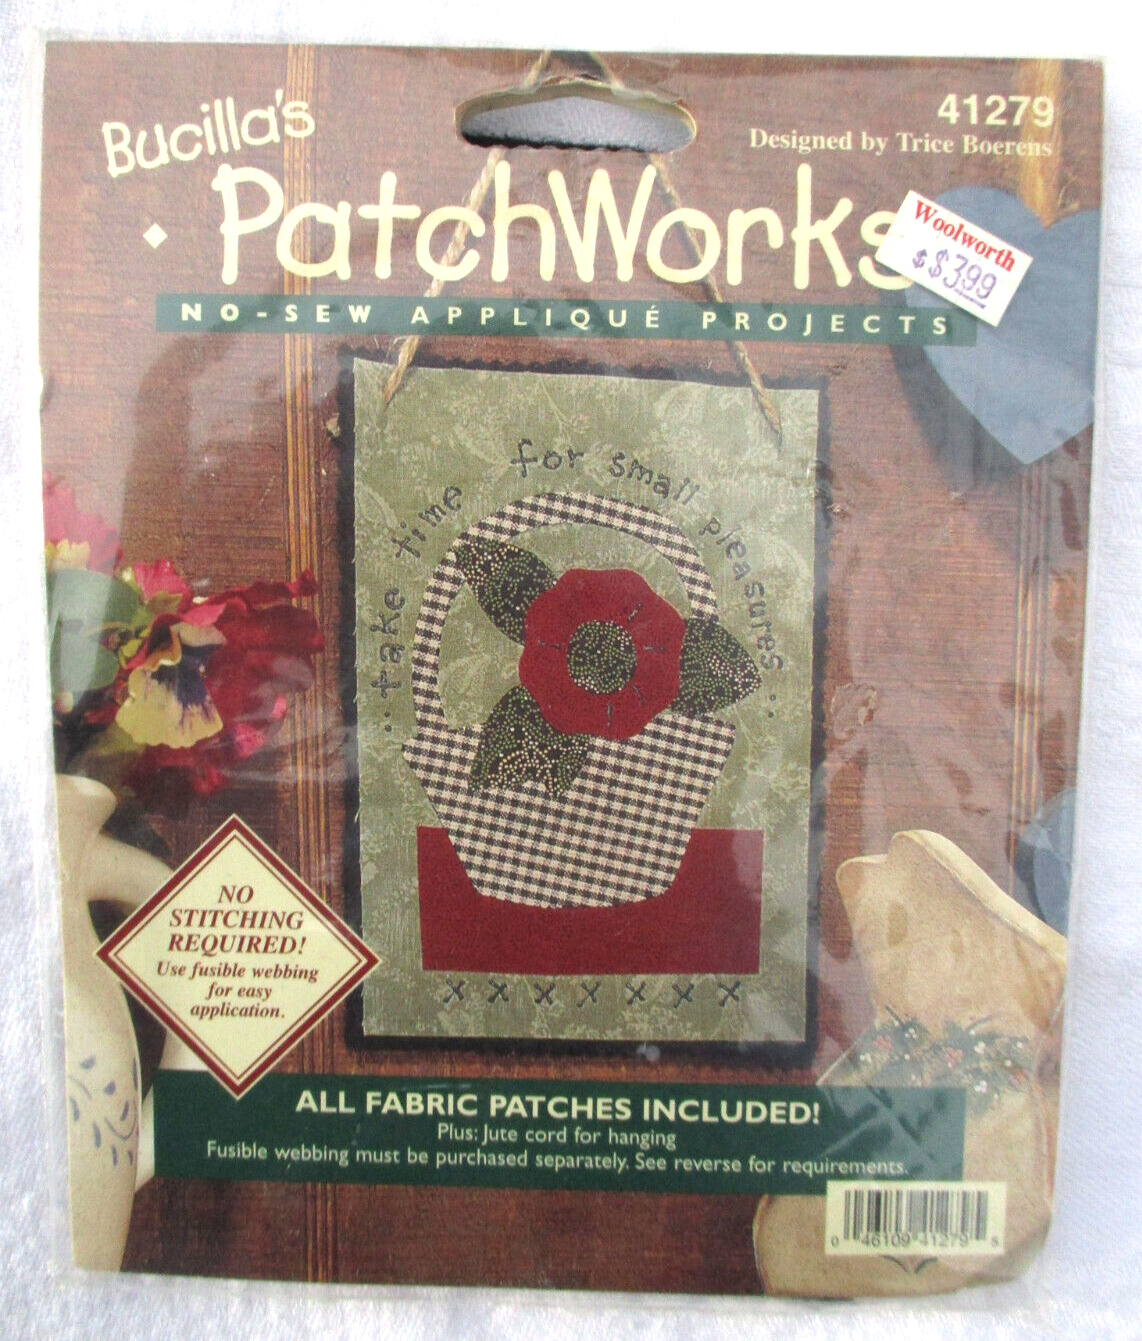 Bucilla PatchWorks No Sew Applique Kit TAKE TIME for SMALL PLEASURES NEW 1990s - $9.49